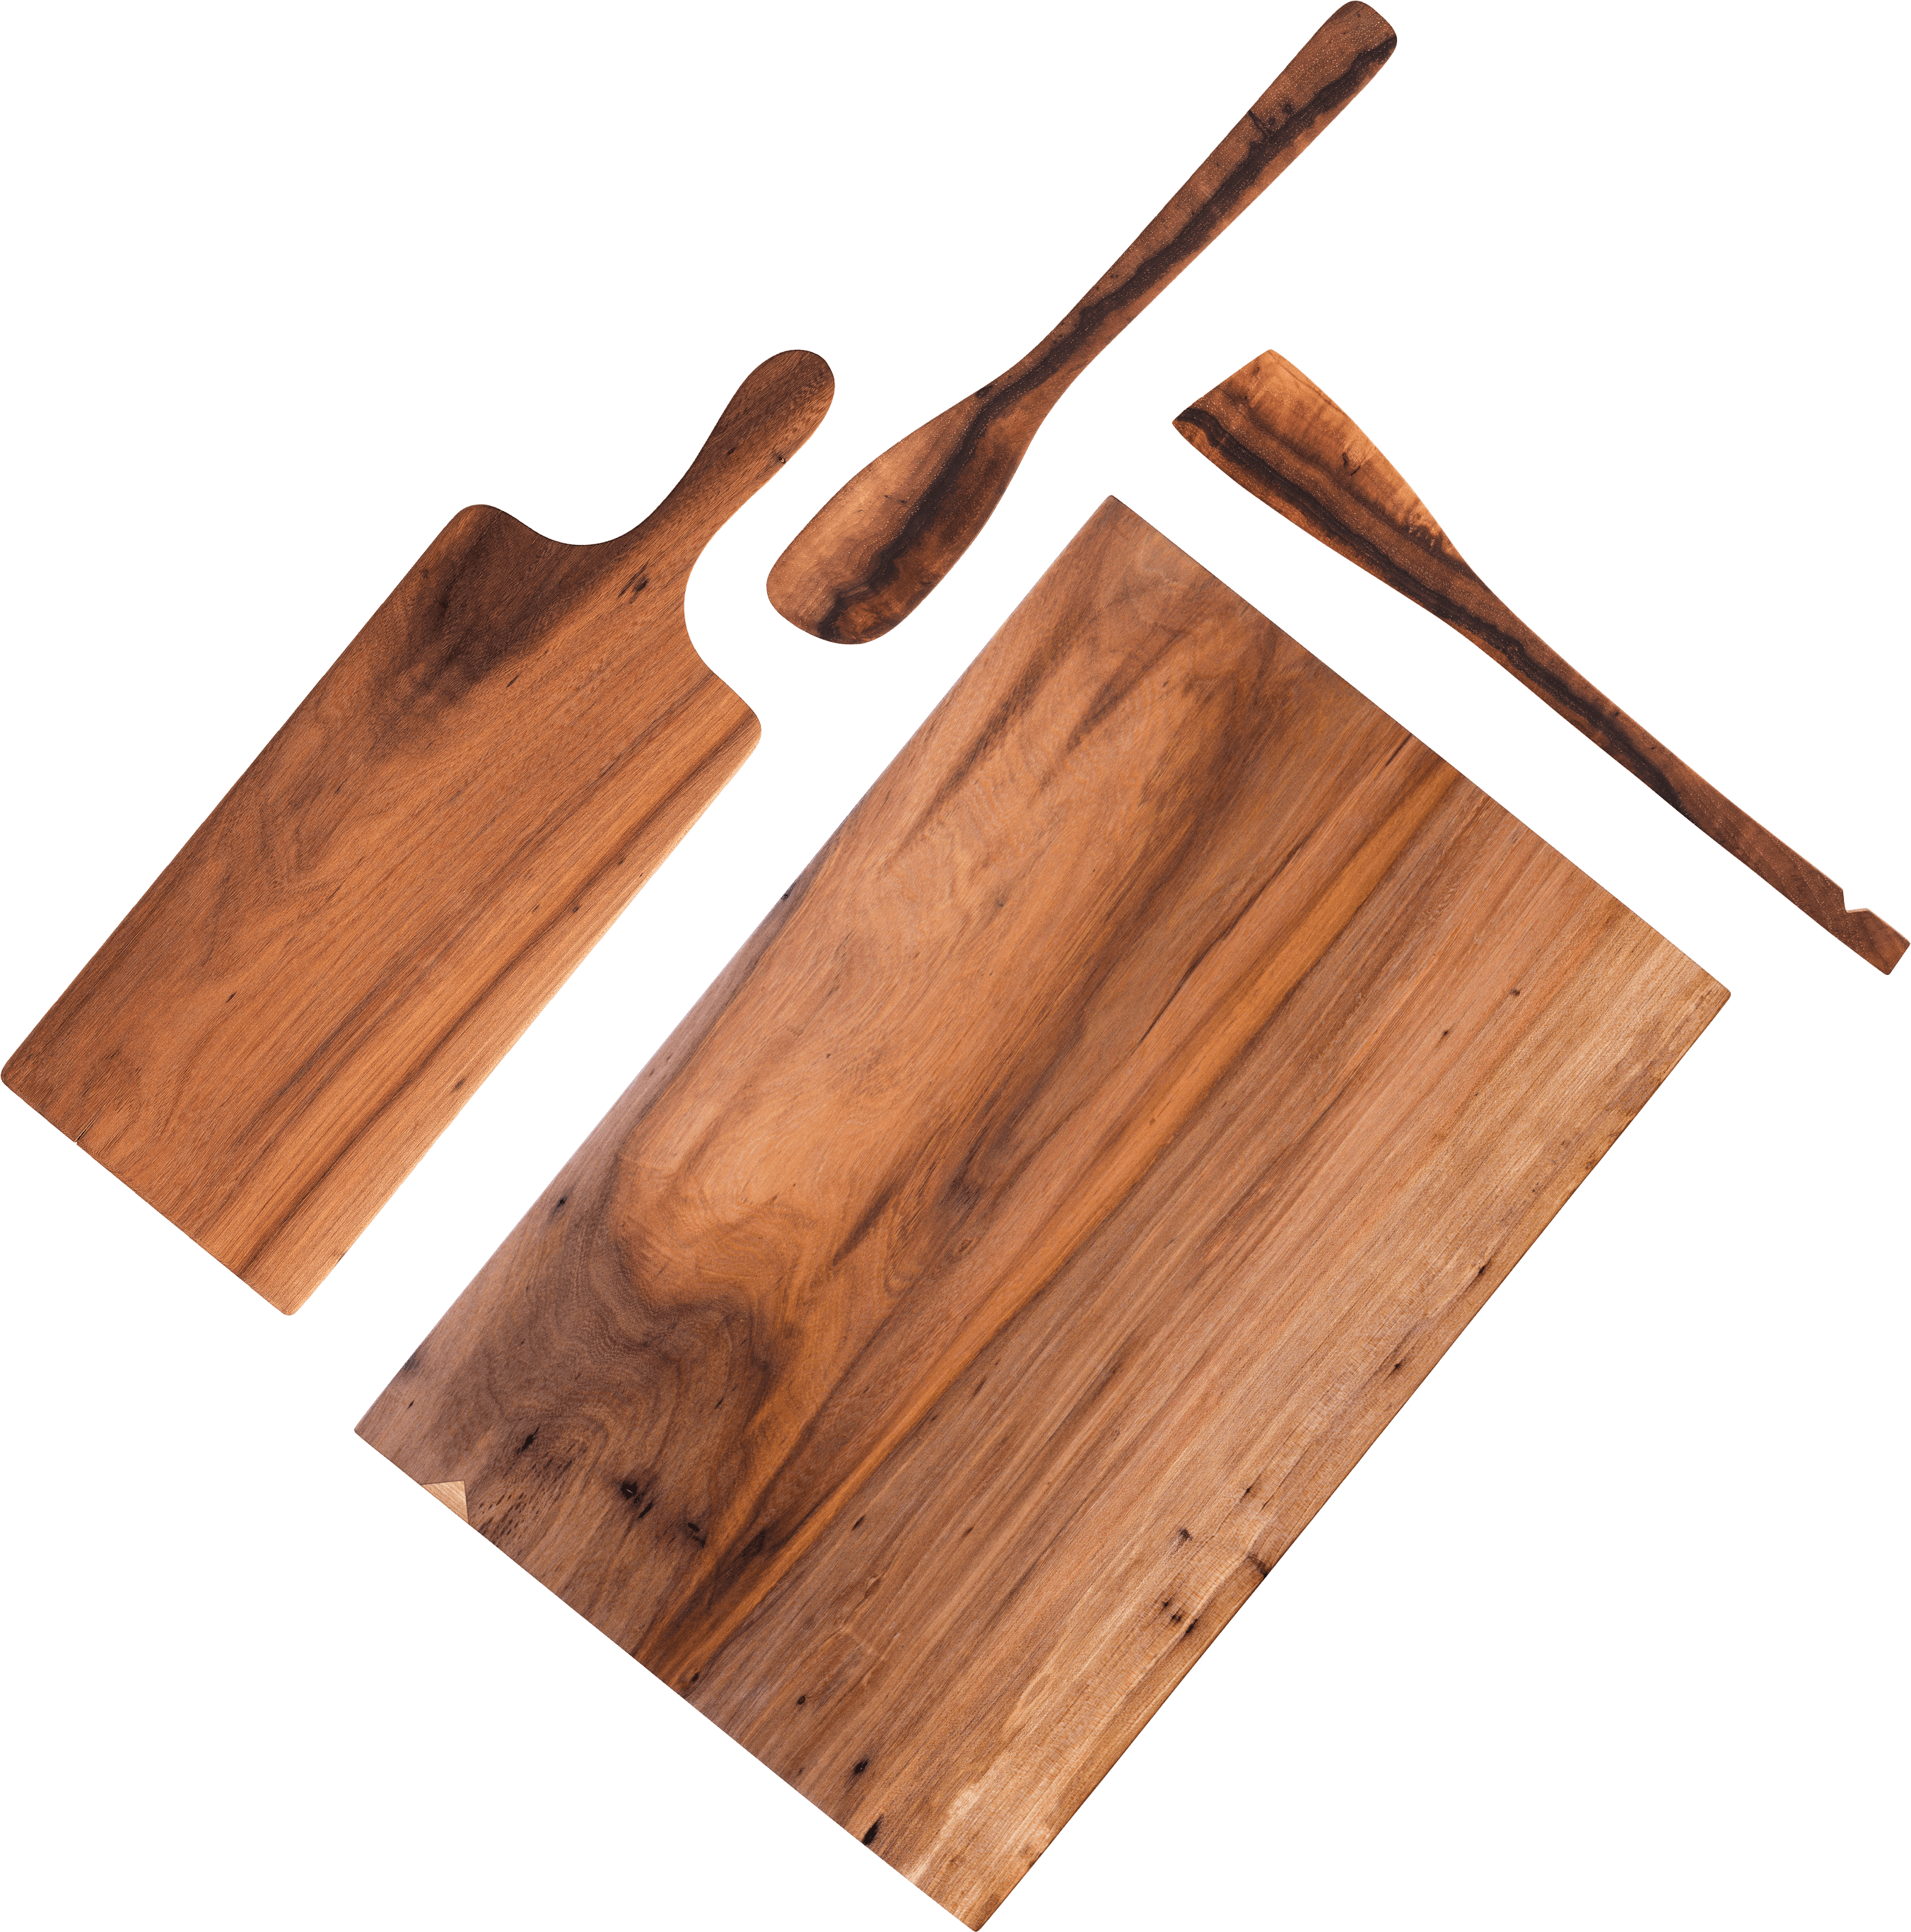 Notch cutting boards and wooden spoons